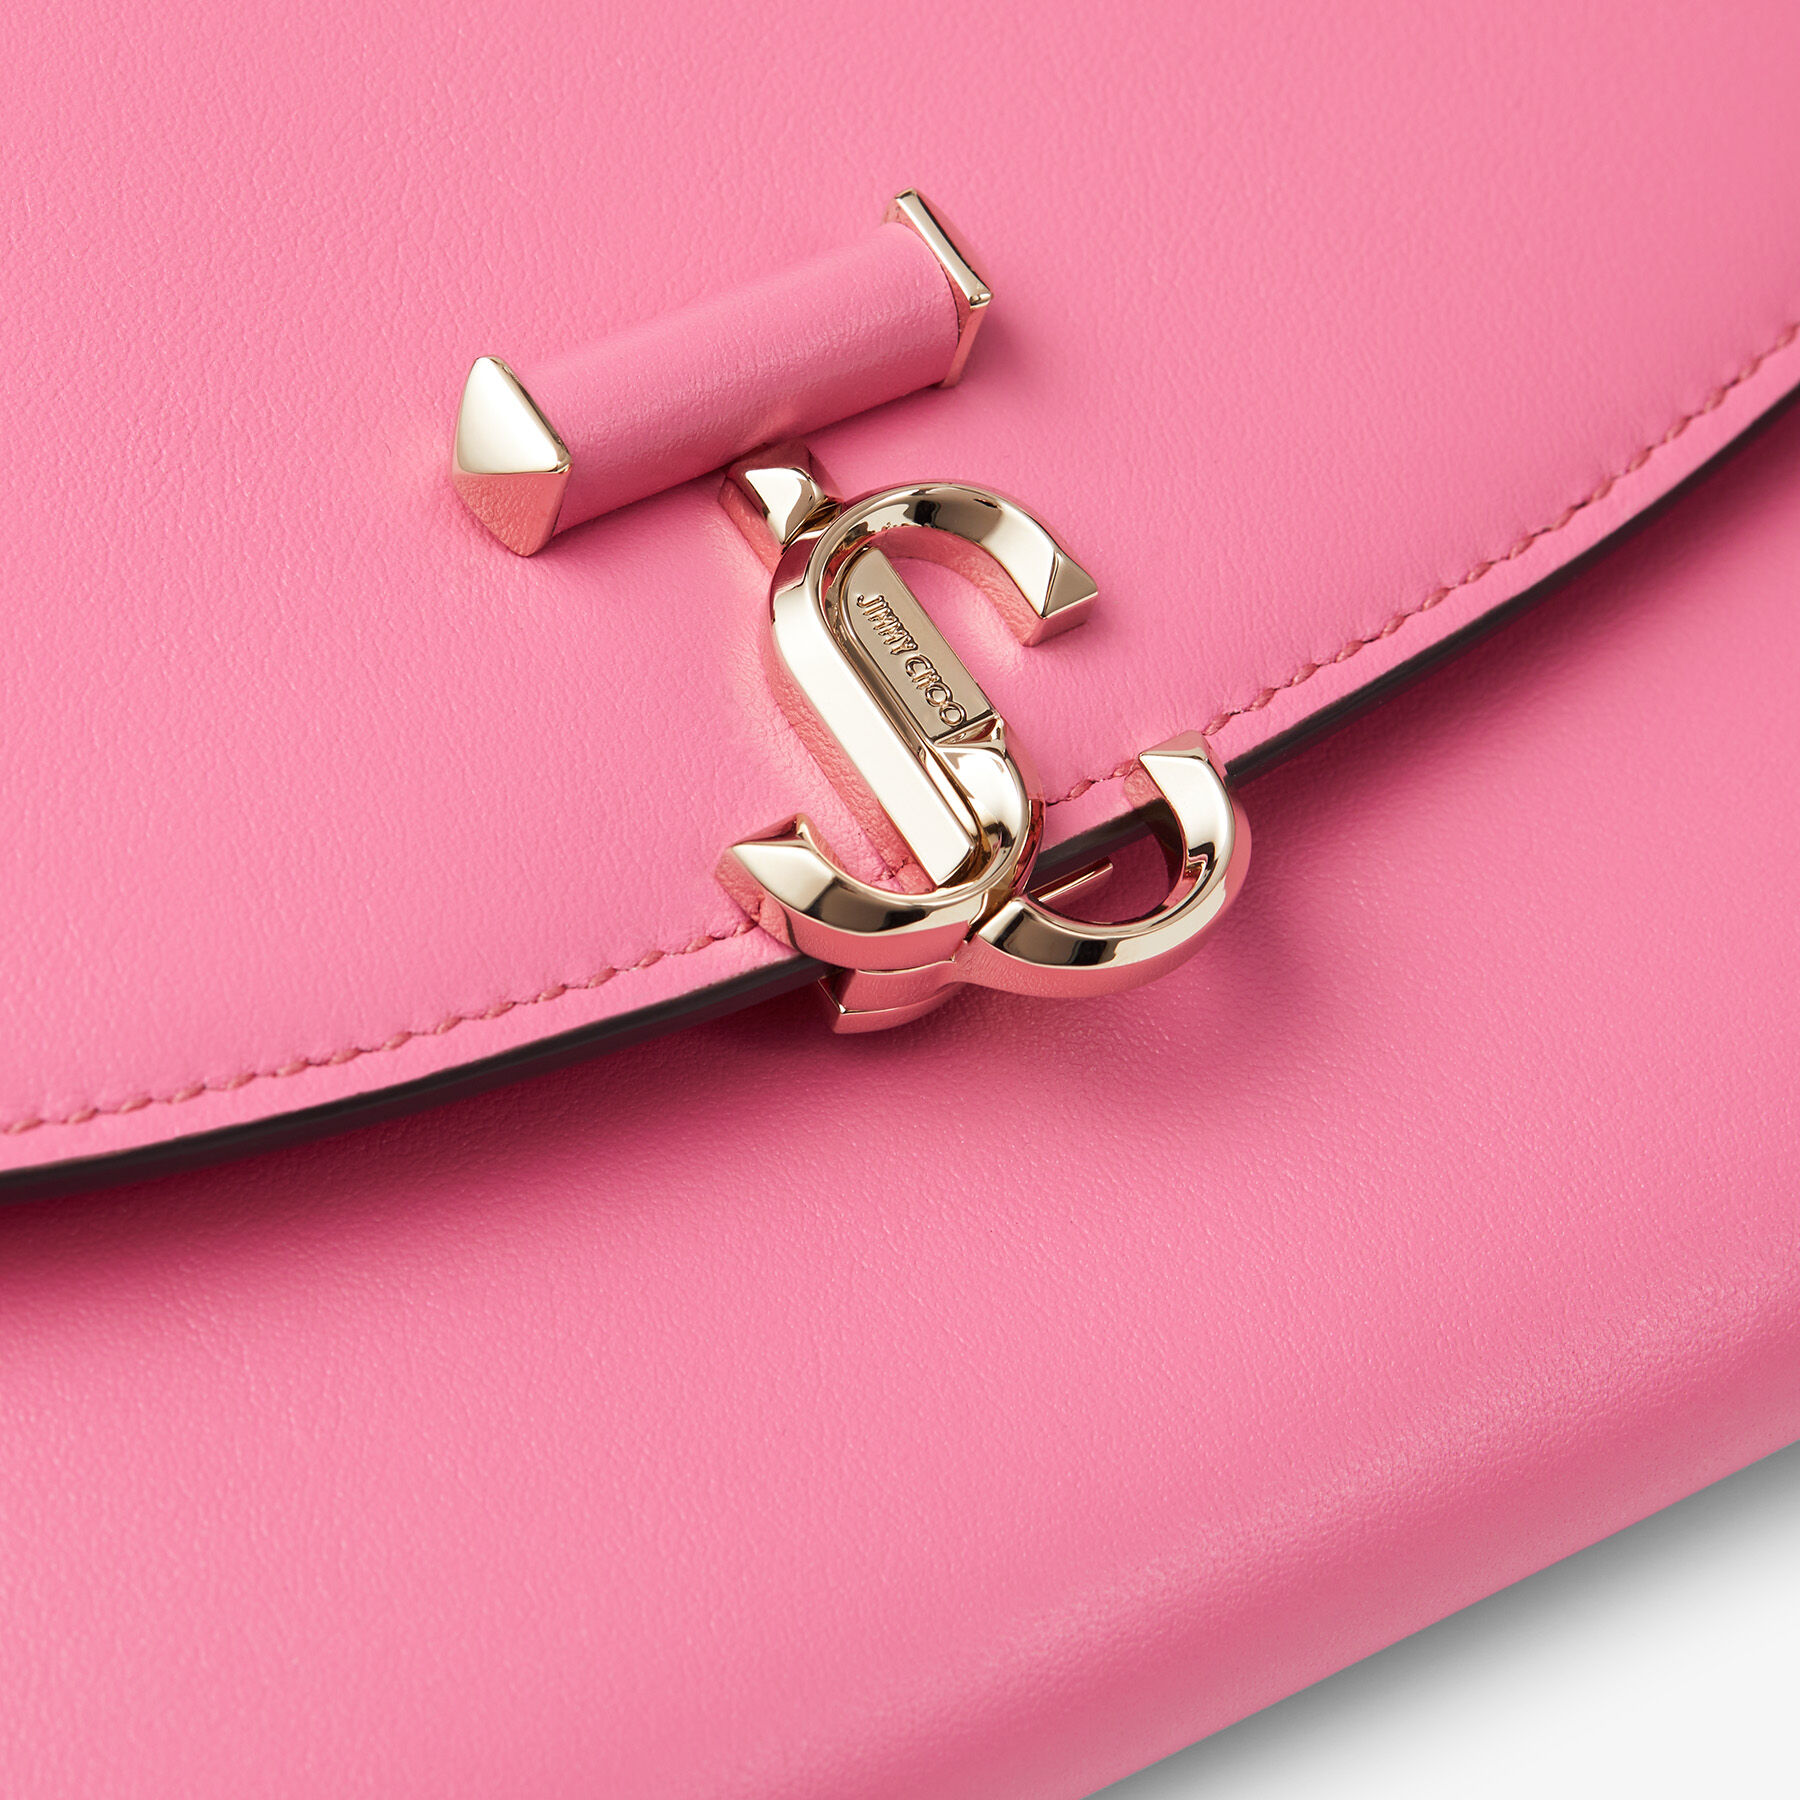 Candy Pink Smooth Calf Pouch with Light Gold JC Emblem | JC ENVELOPE ...